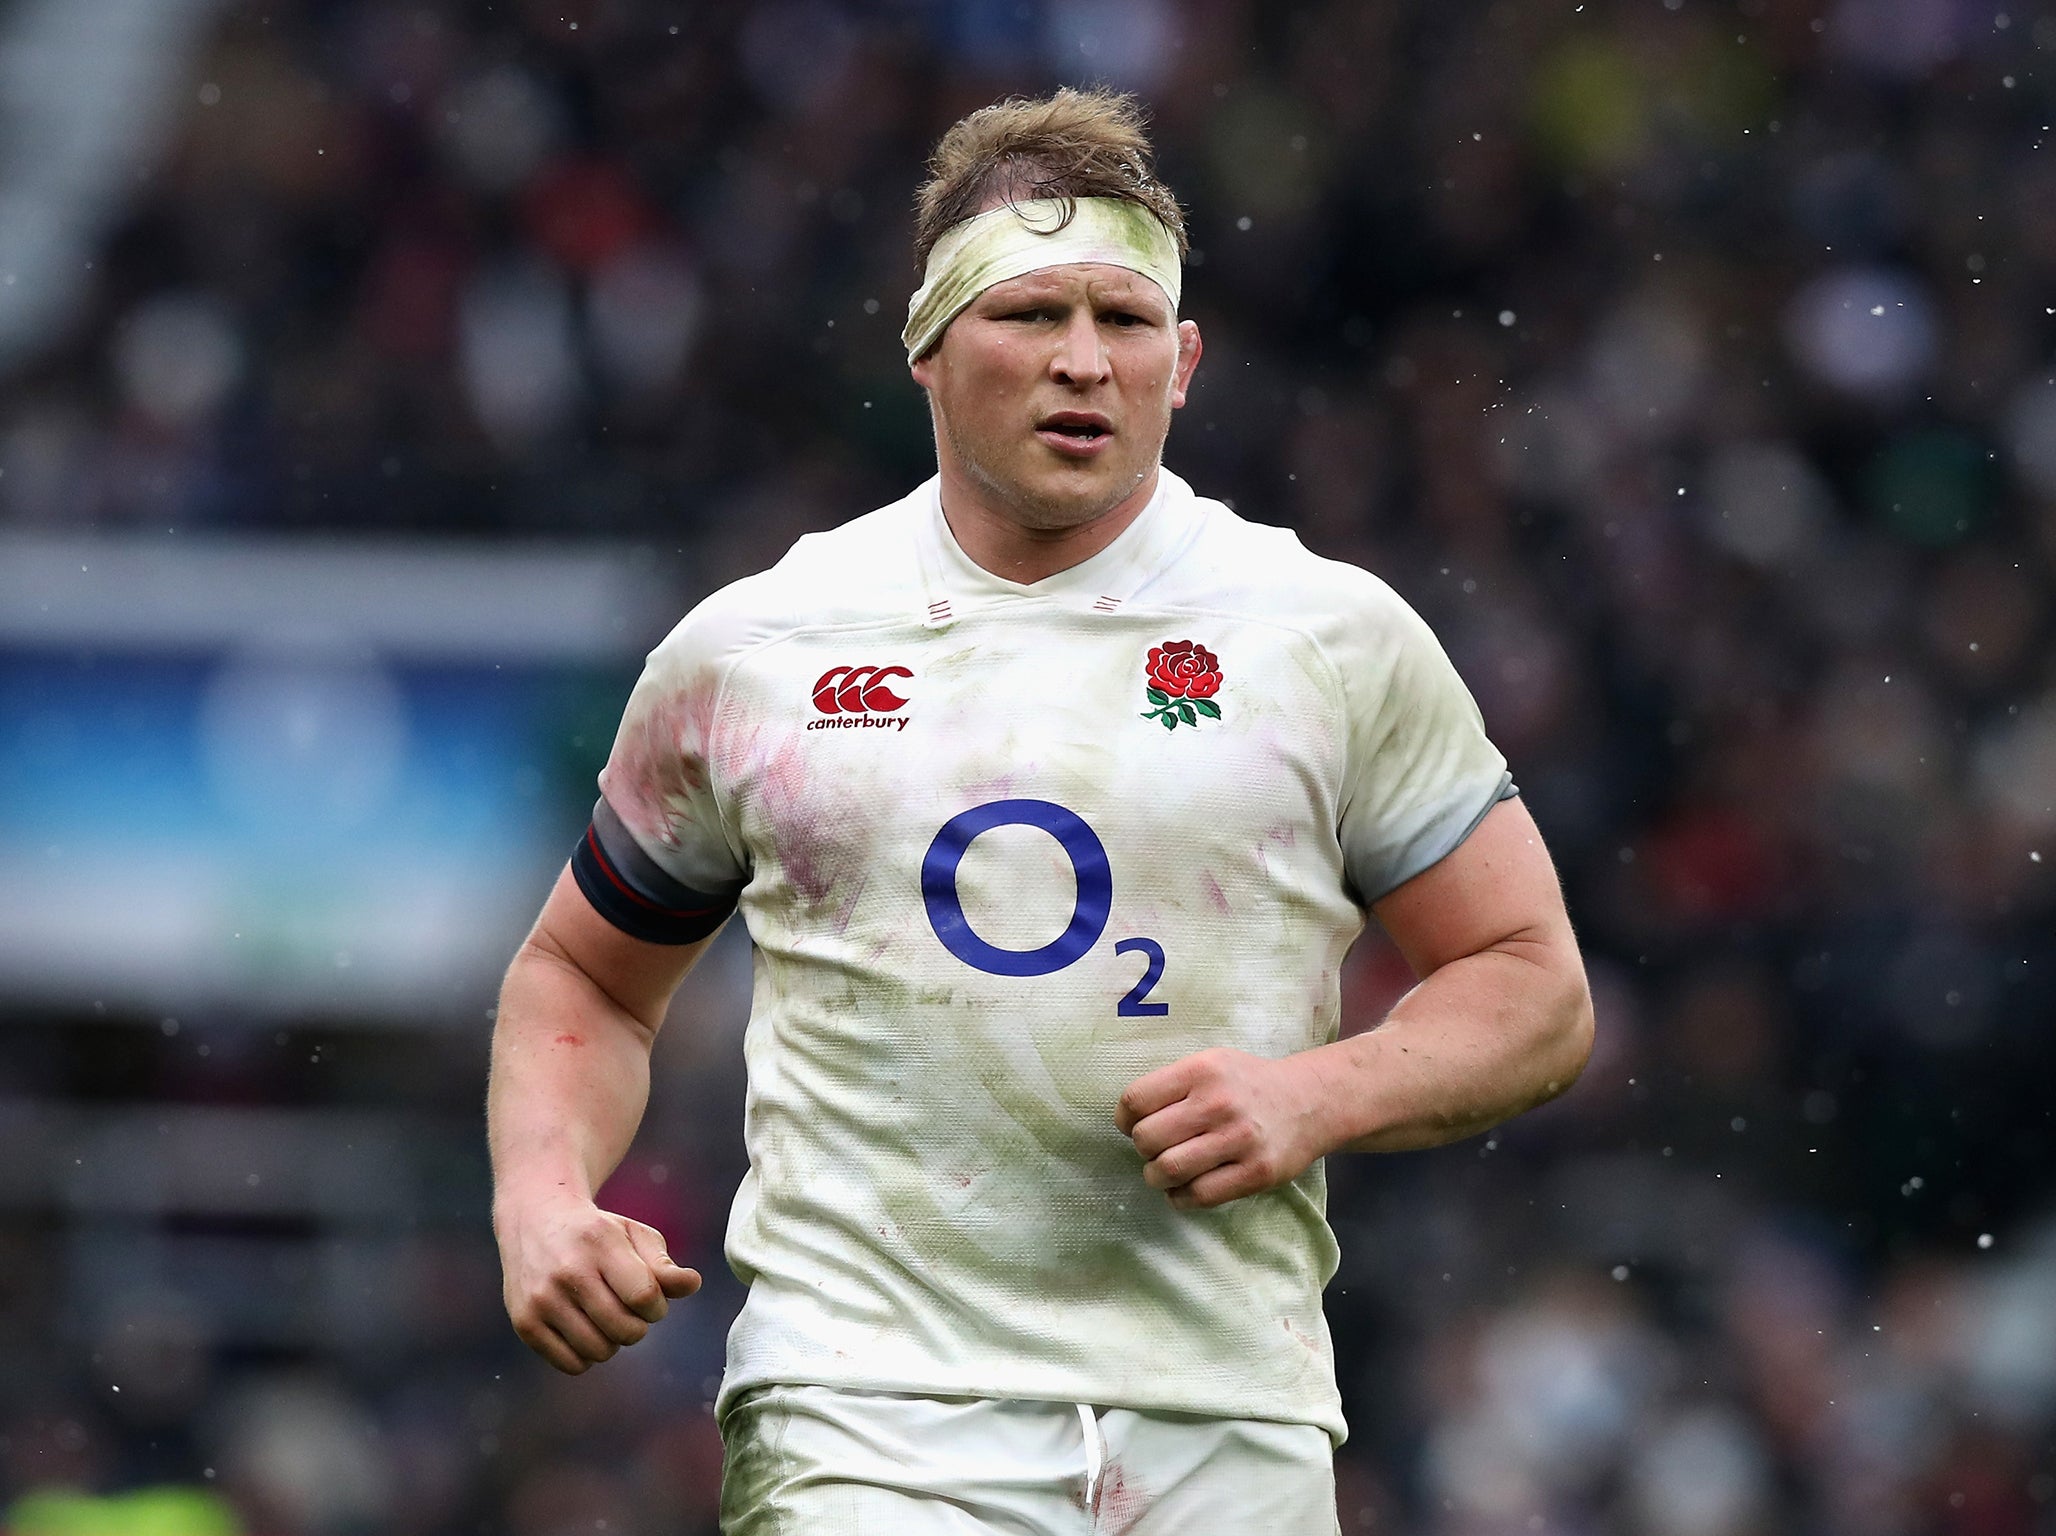 Hartley hasn't played a match since suffering a concussion in March